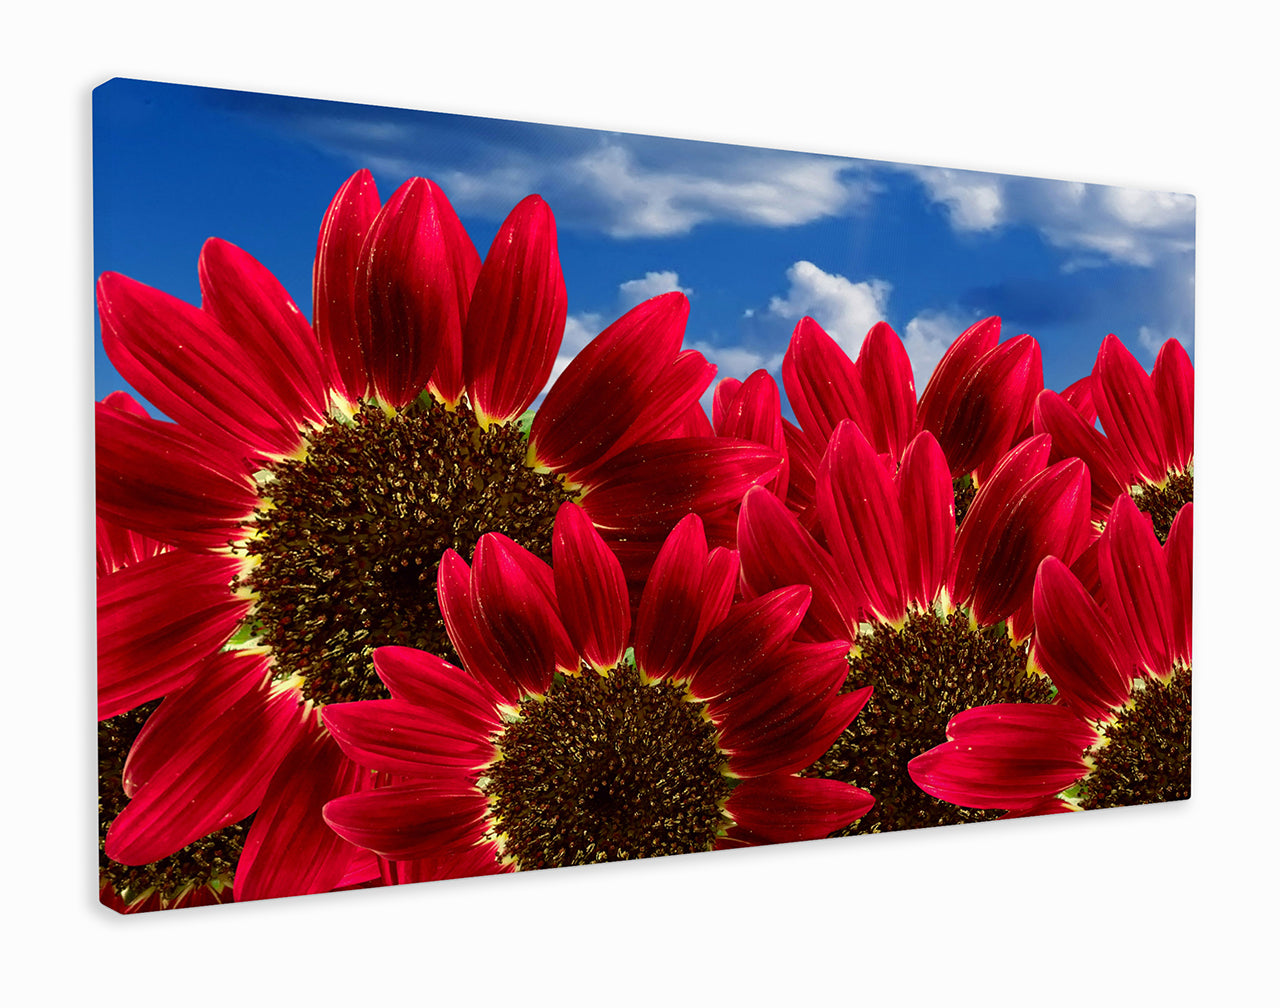 Red sunflowers bunch